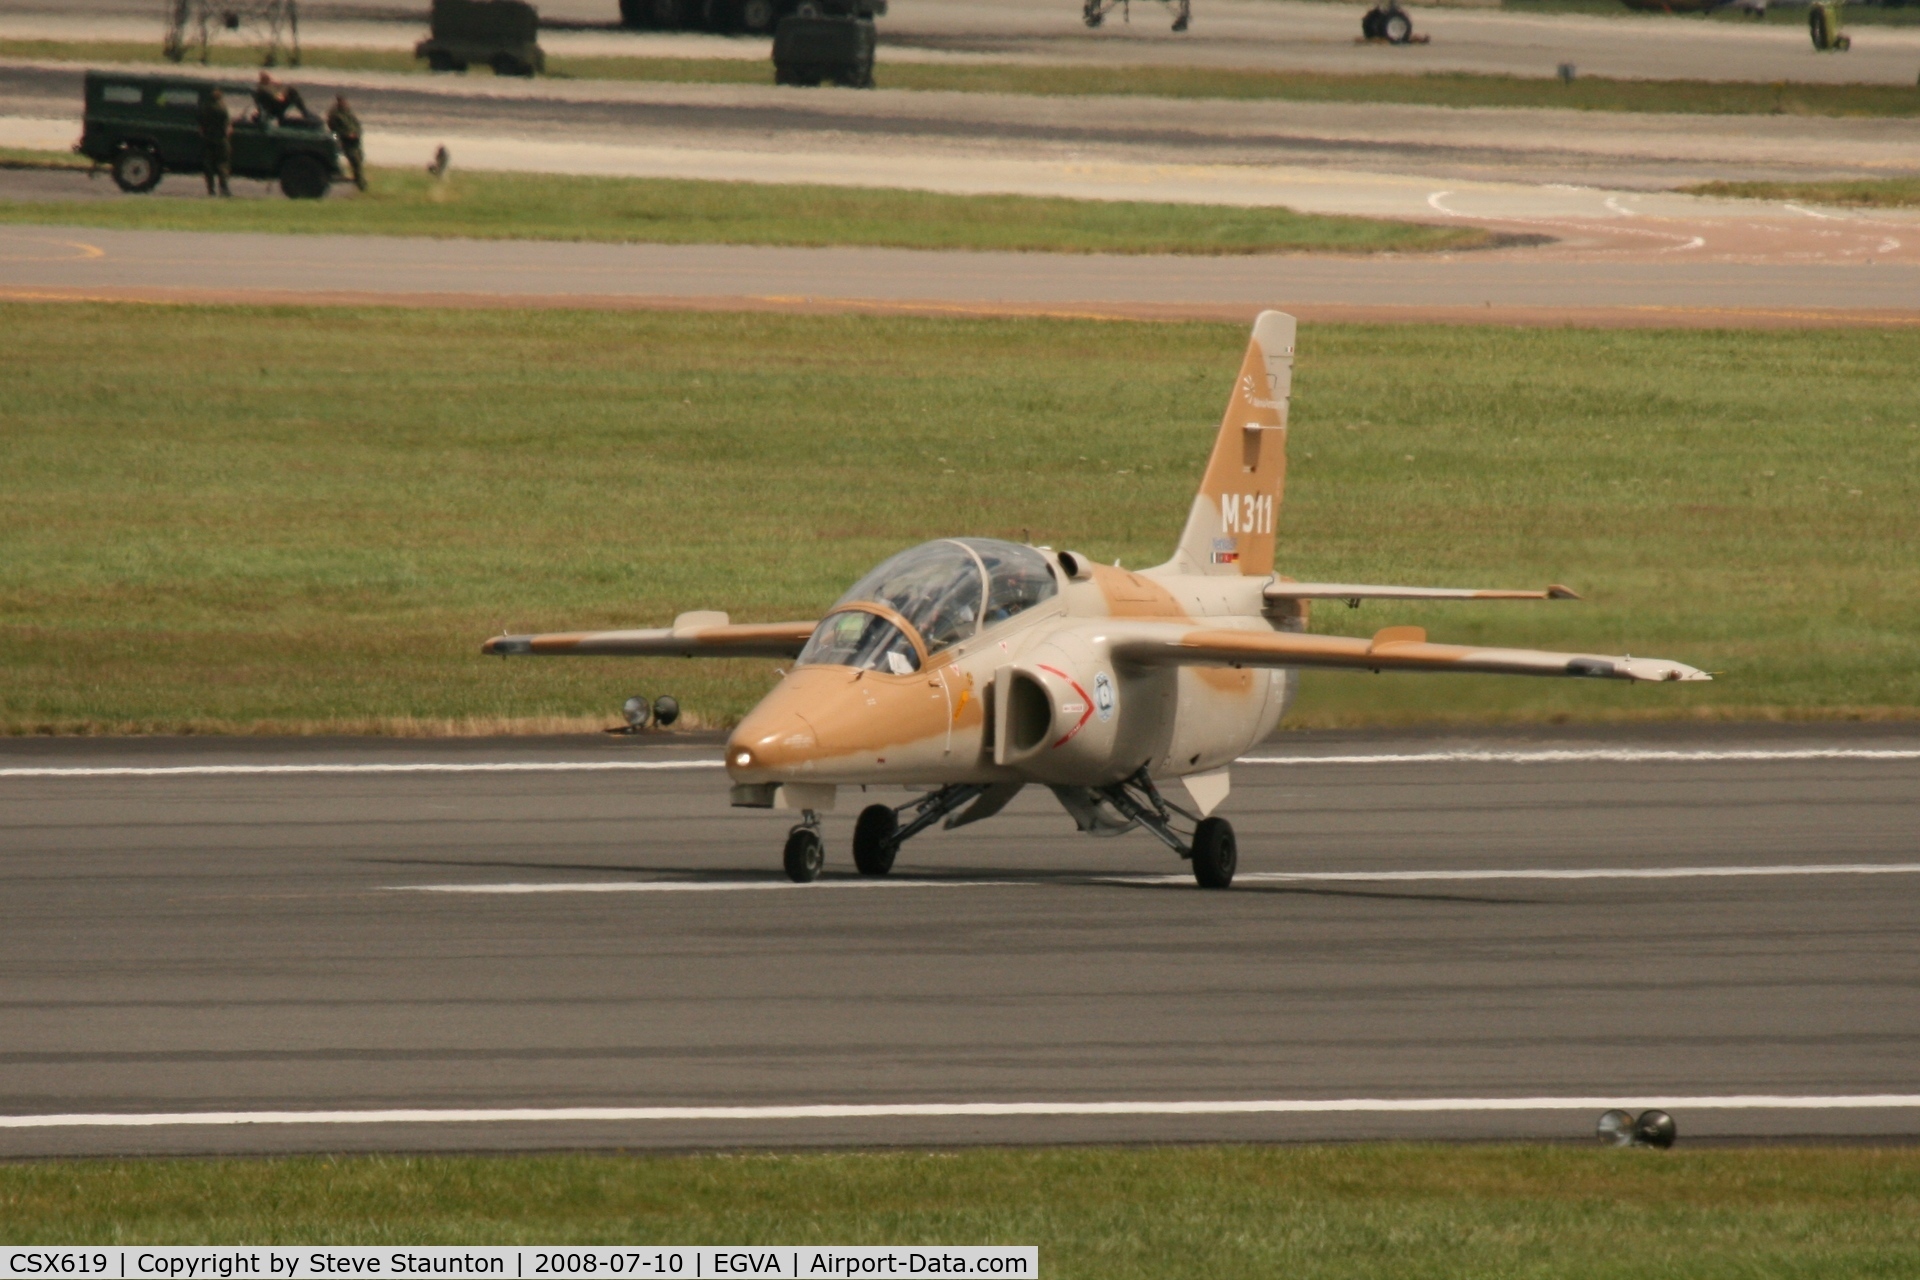 CSX619, Aermacchi M-311 C/N 201, Taken at the Royal International Air Tattoo 2008 during arrivals and departures (show days cancelled due to bad weather)